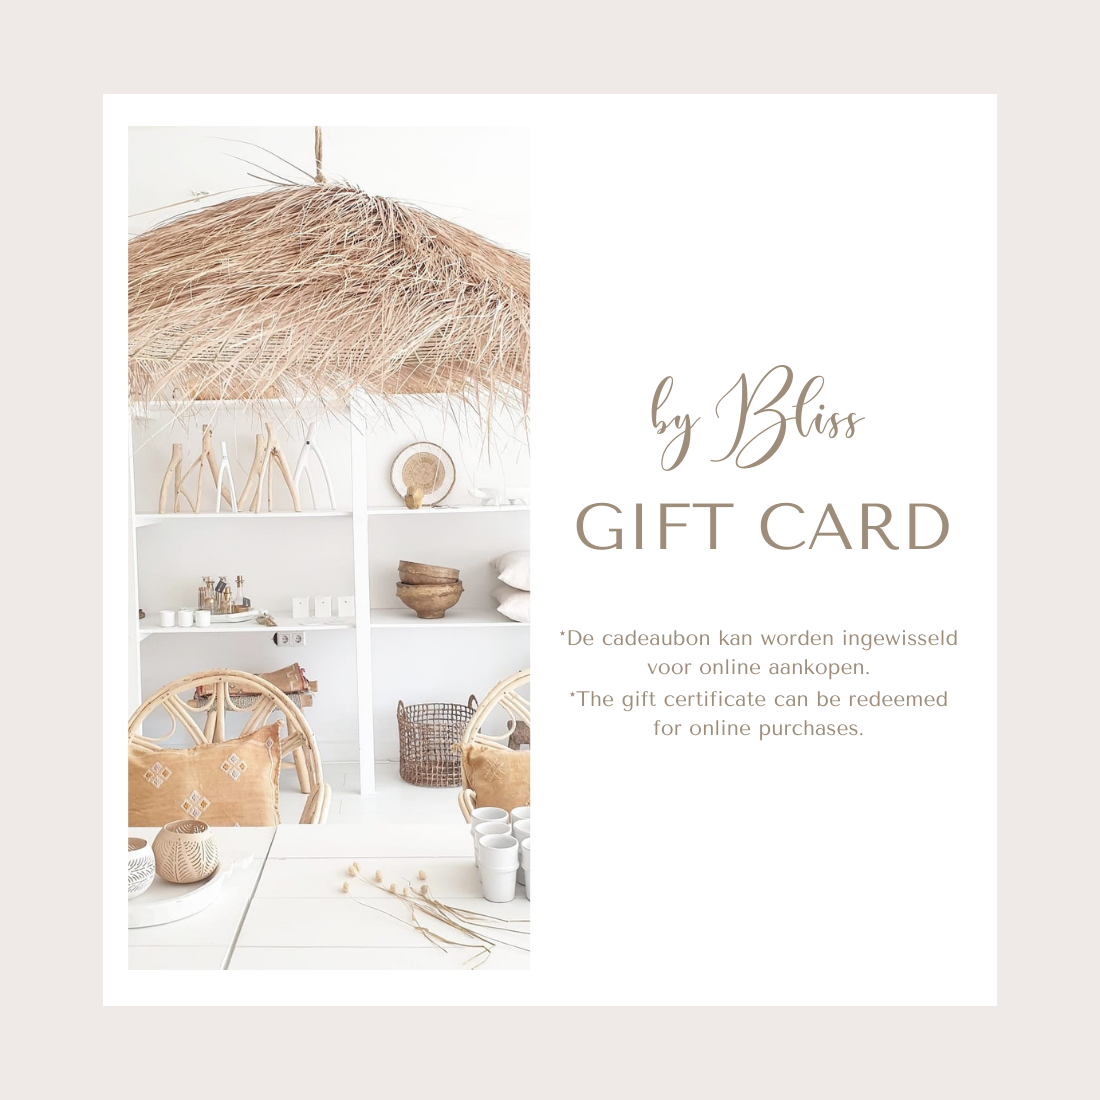 by Bliss Gift Card